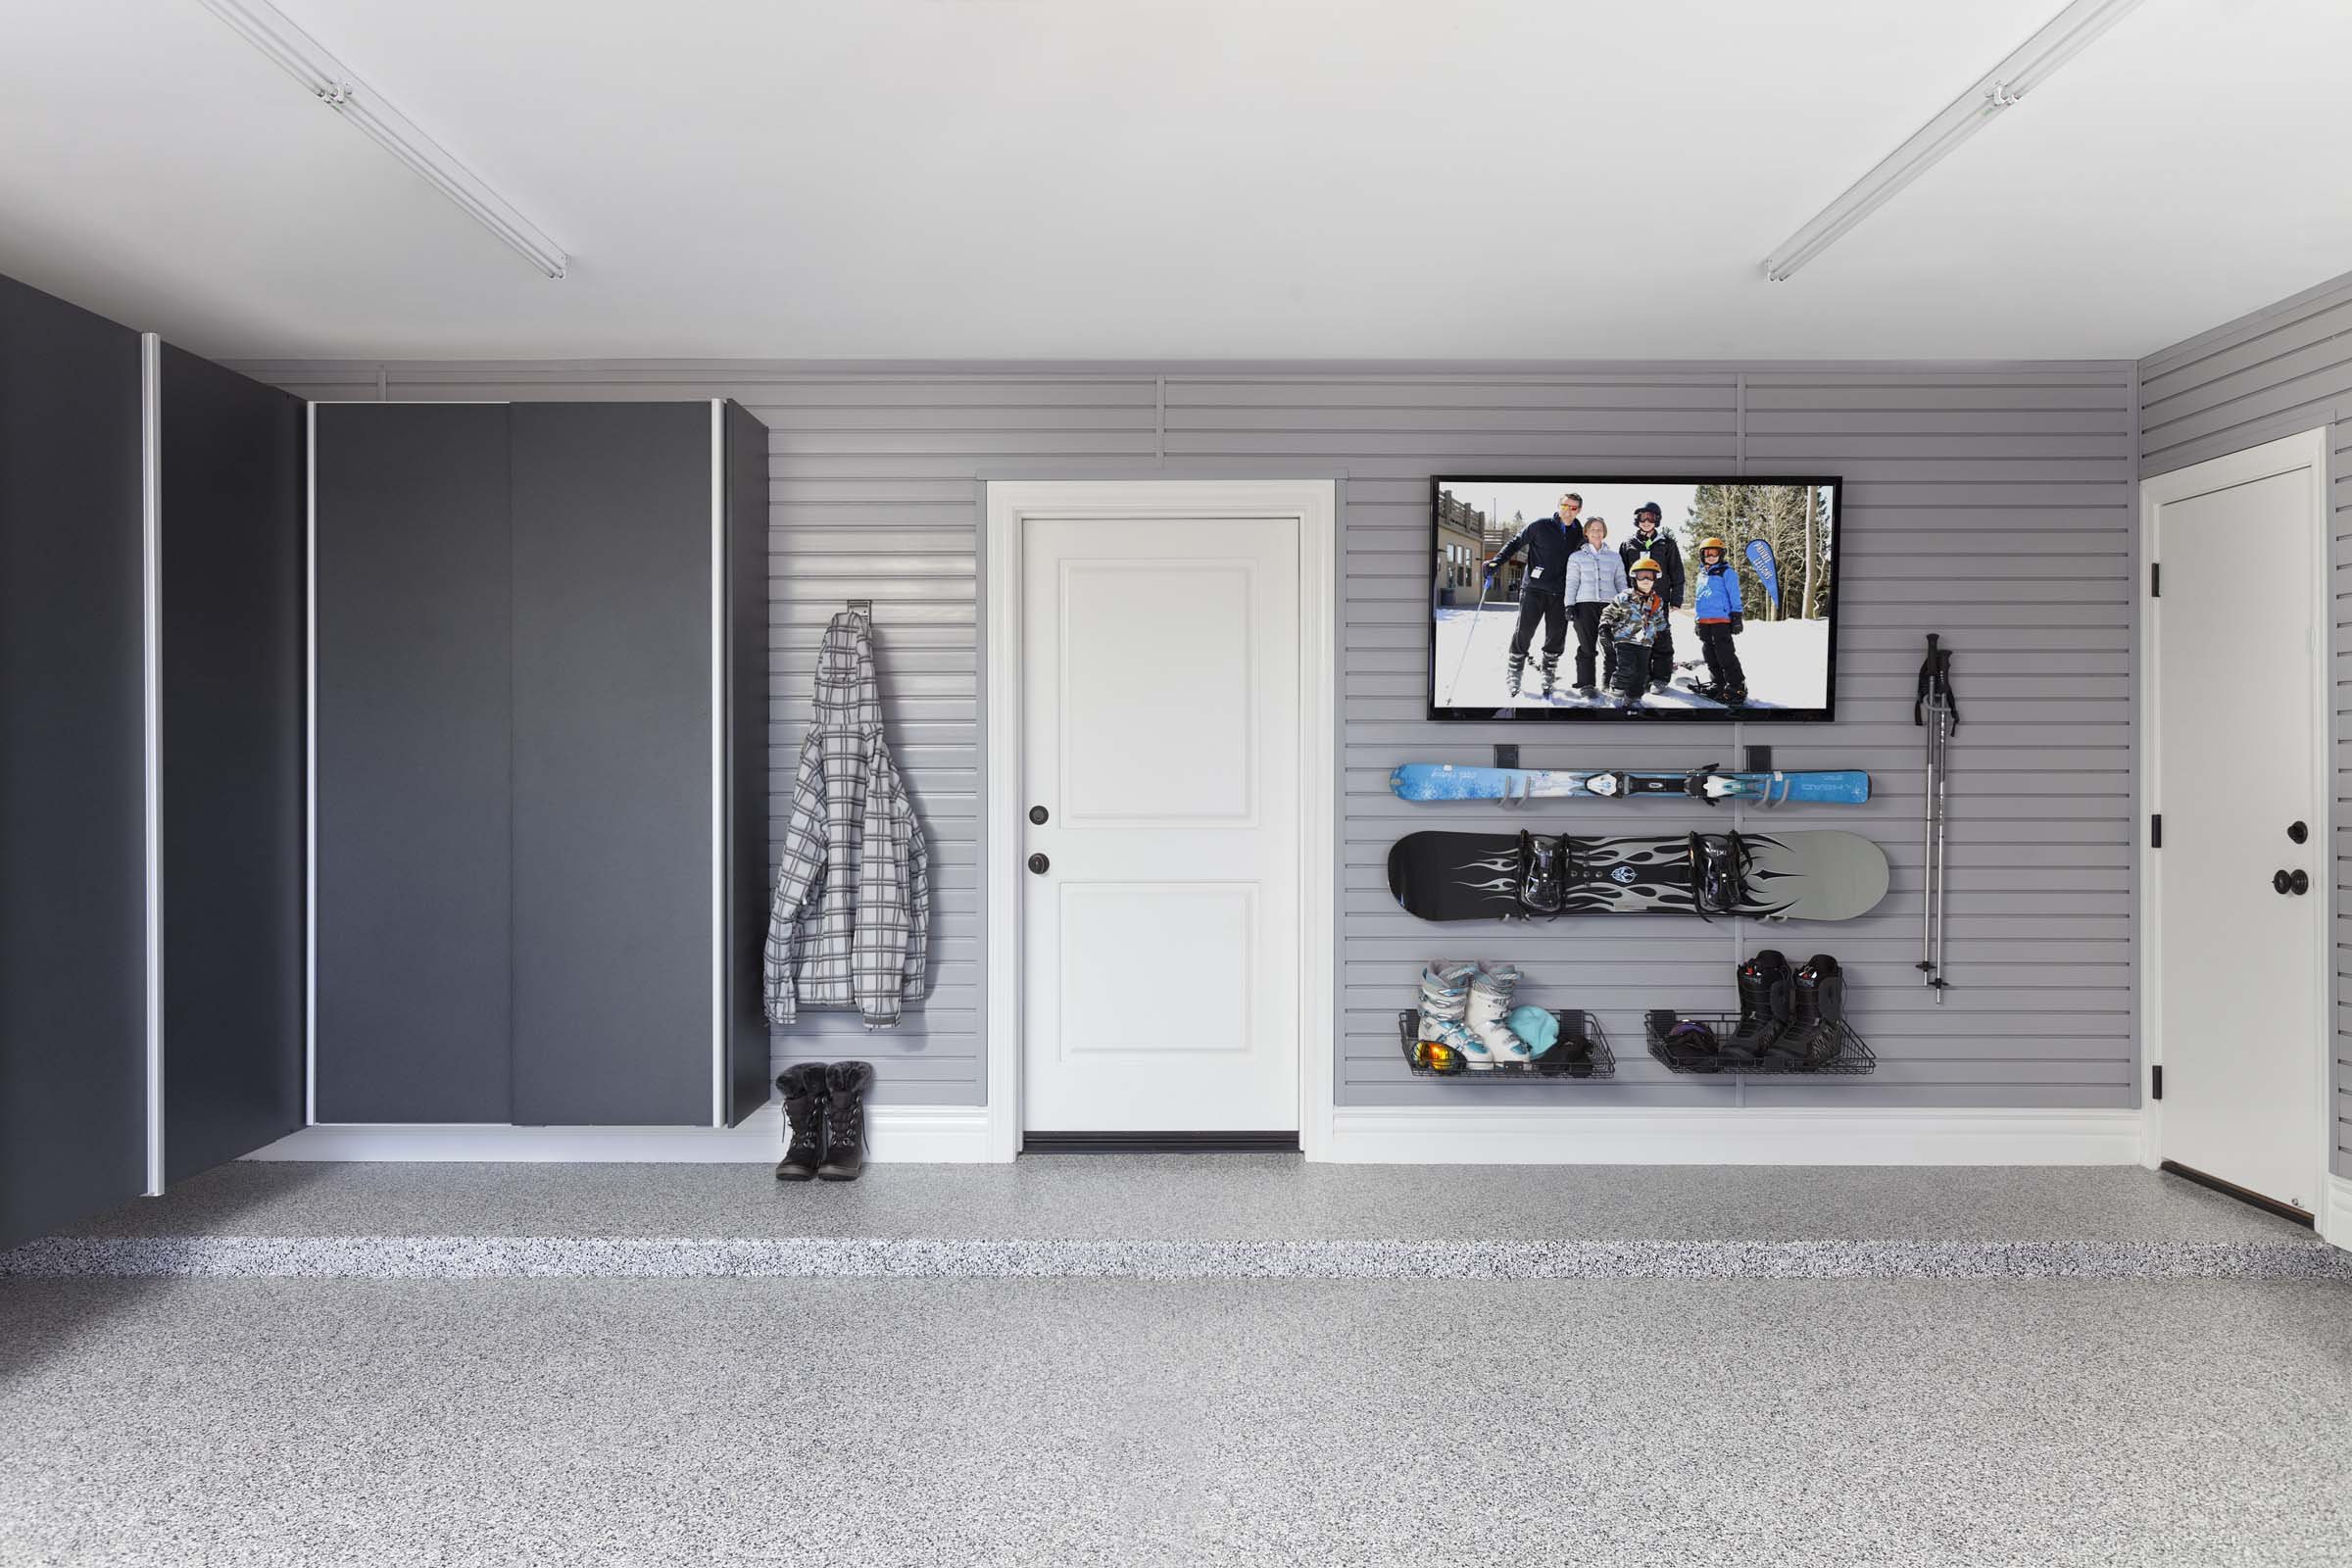   Functional Fitness Spaces   Storage That Supports Your Routine   Free 3-D Design  